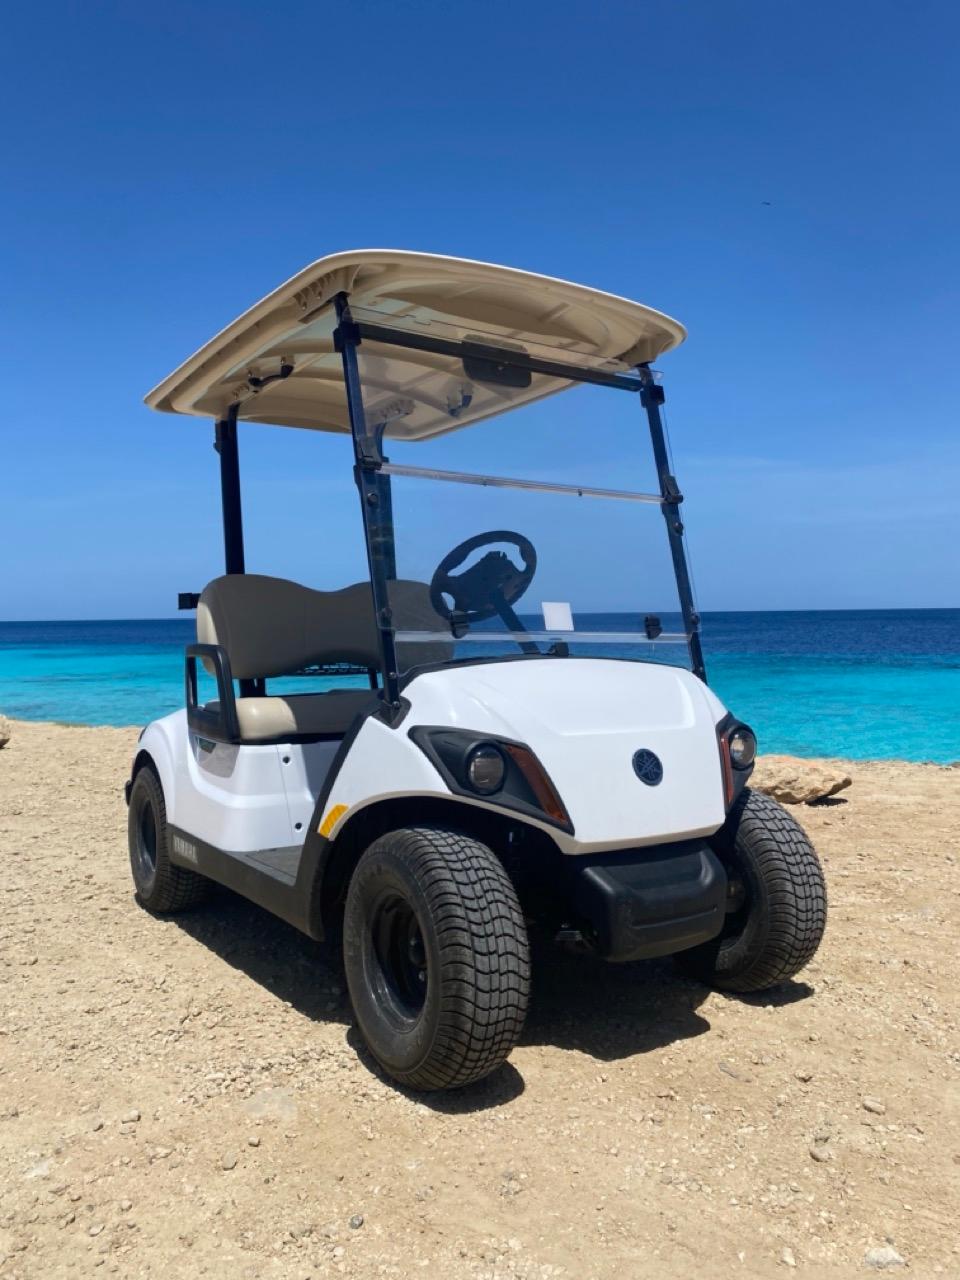 Yamaha 2-seater golf cart parked with Bonaire's scenic coastline in the background.